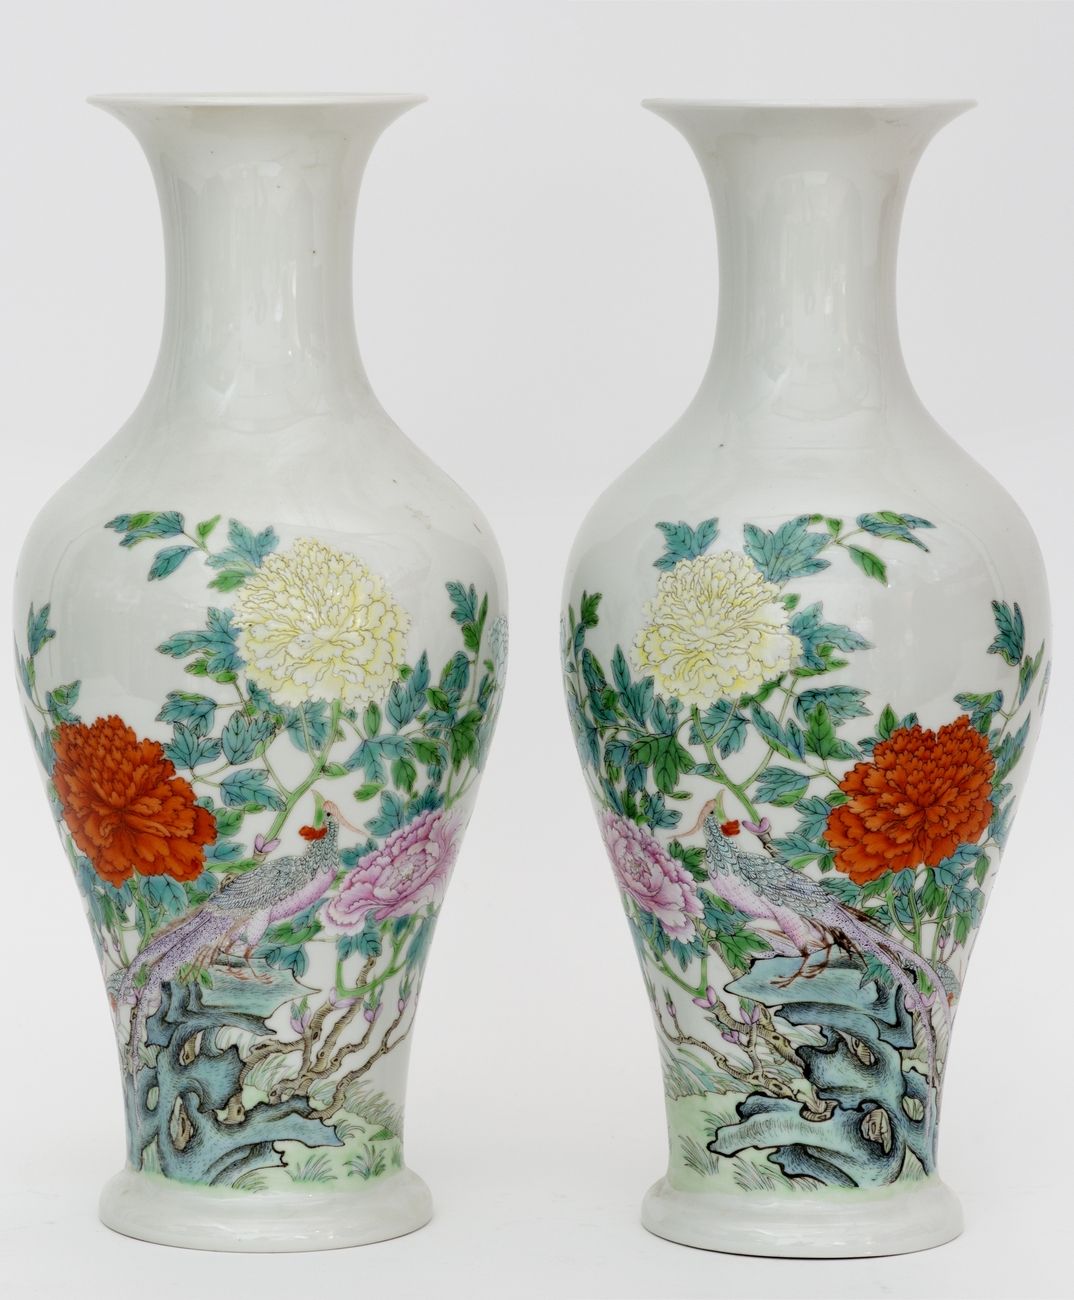 Null China, Republic period (1912-1949)
A pair of porcelain vases decorated with&hellip;